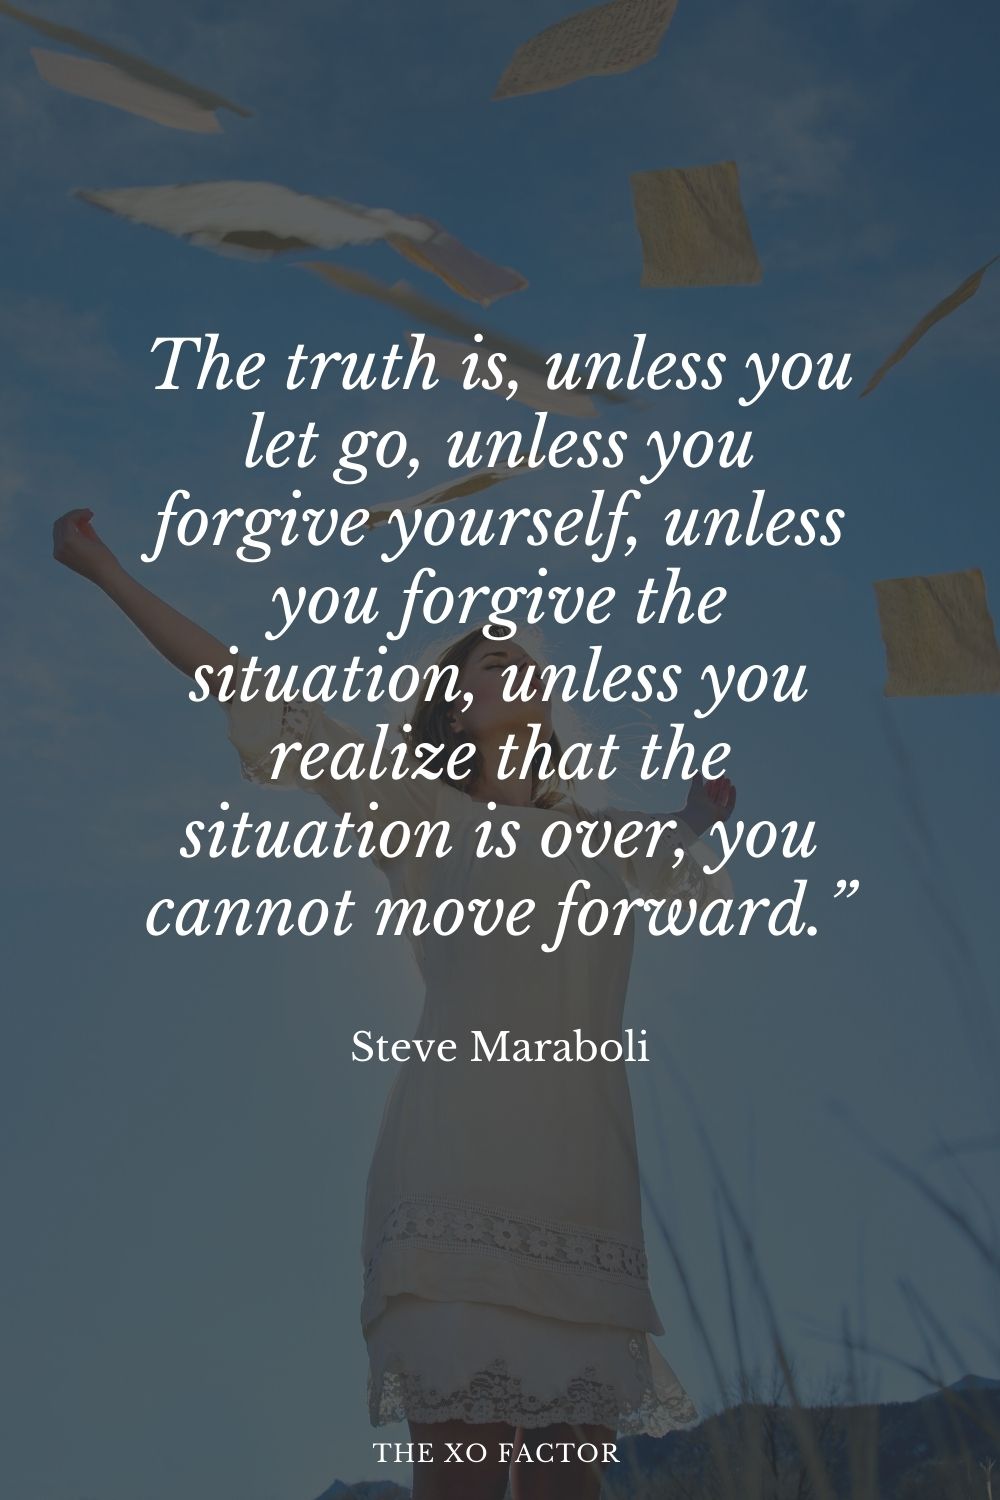 The truth is, unless you let go, unless you forgive yourself, unless you forgive the situation, unless you realize that the situation is over, you cannot move forward.” Steve Maraboli